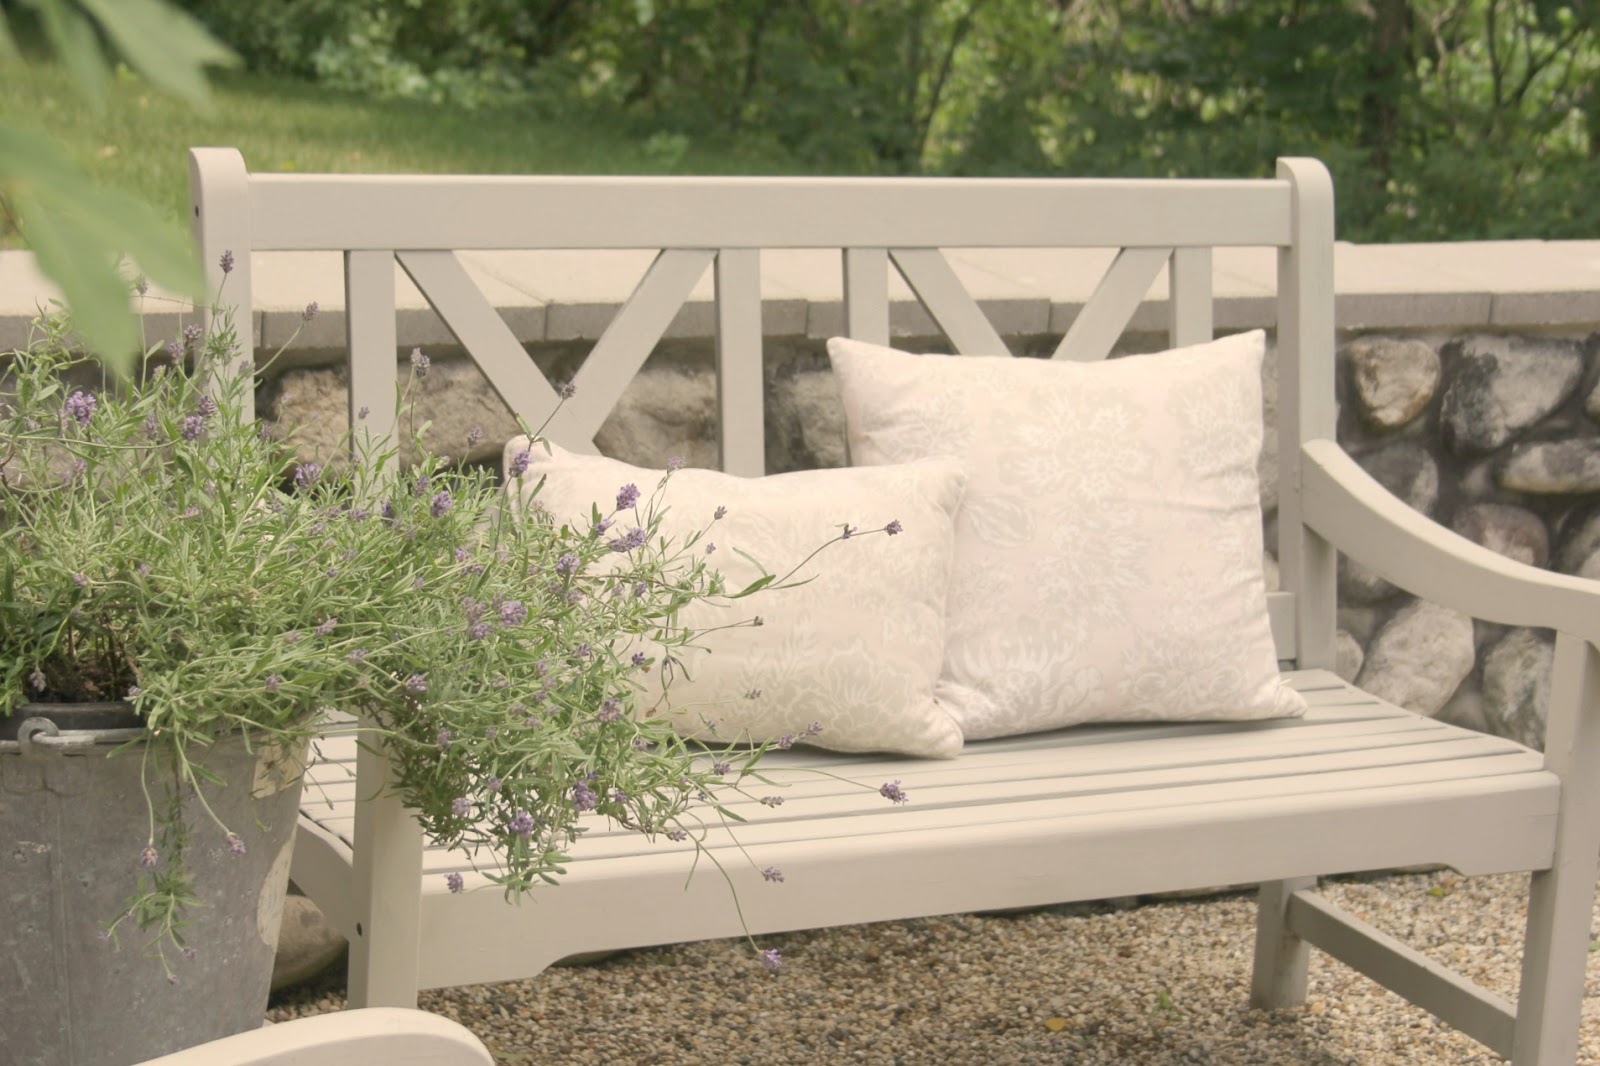 Light grey bench in pea gravel French inspired courtyard with lavender in bucket - Hello Lovely Studio